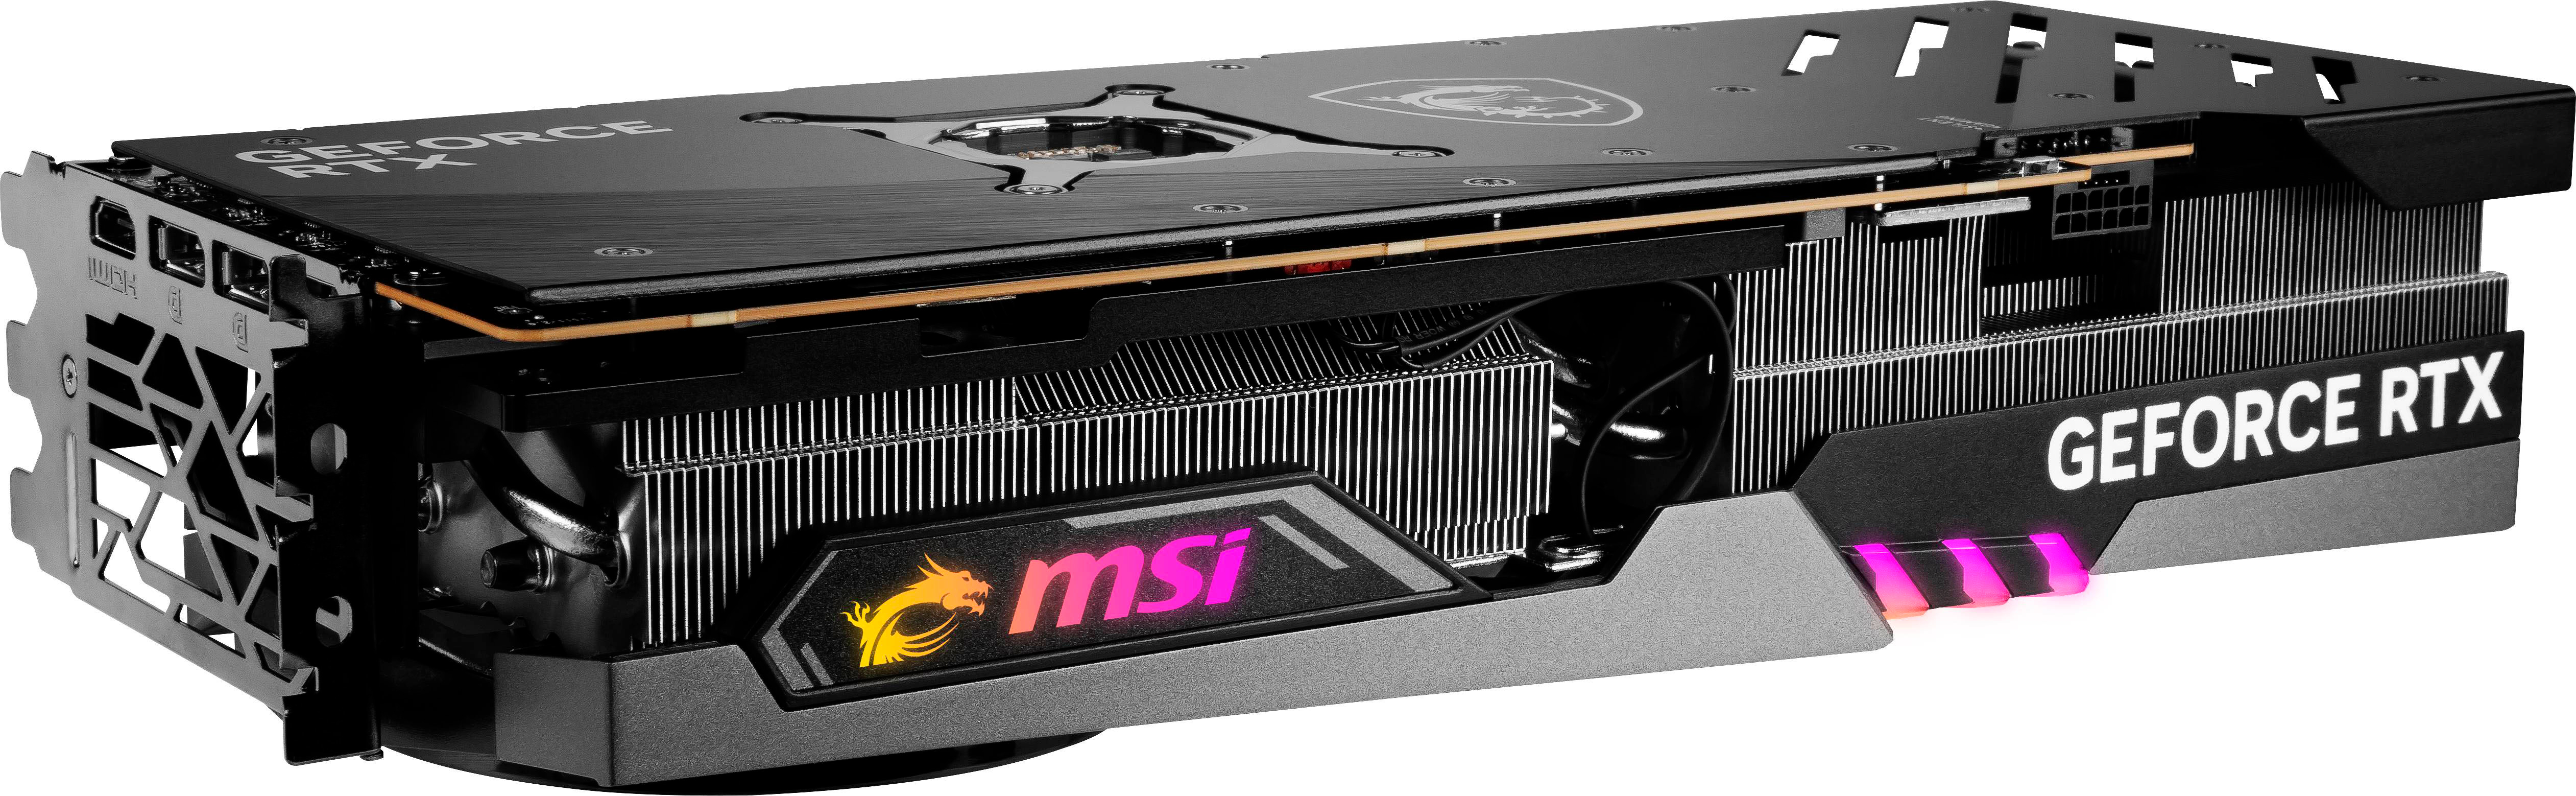 MSI GeForce RTX 4080 Gaming X Trio Review - Overclocking & Power Limits